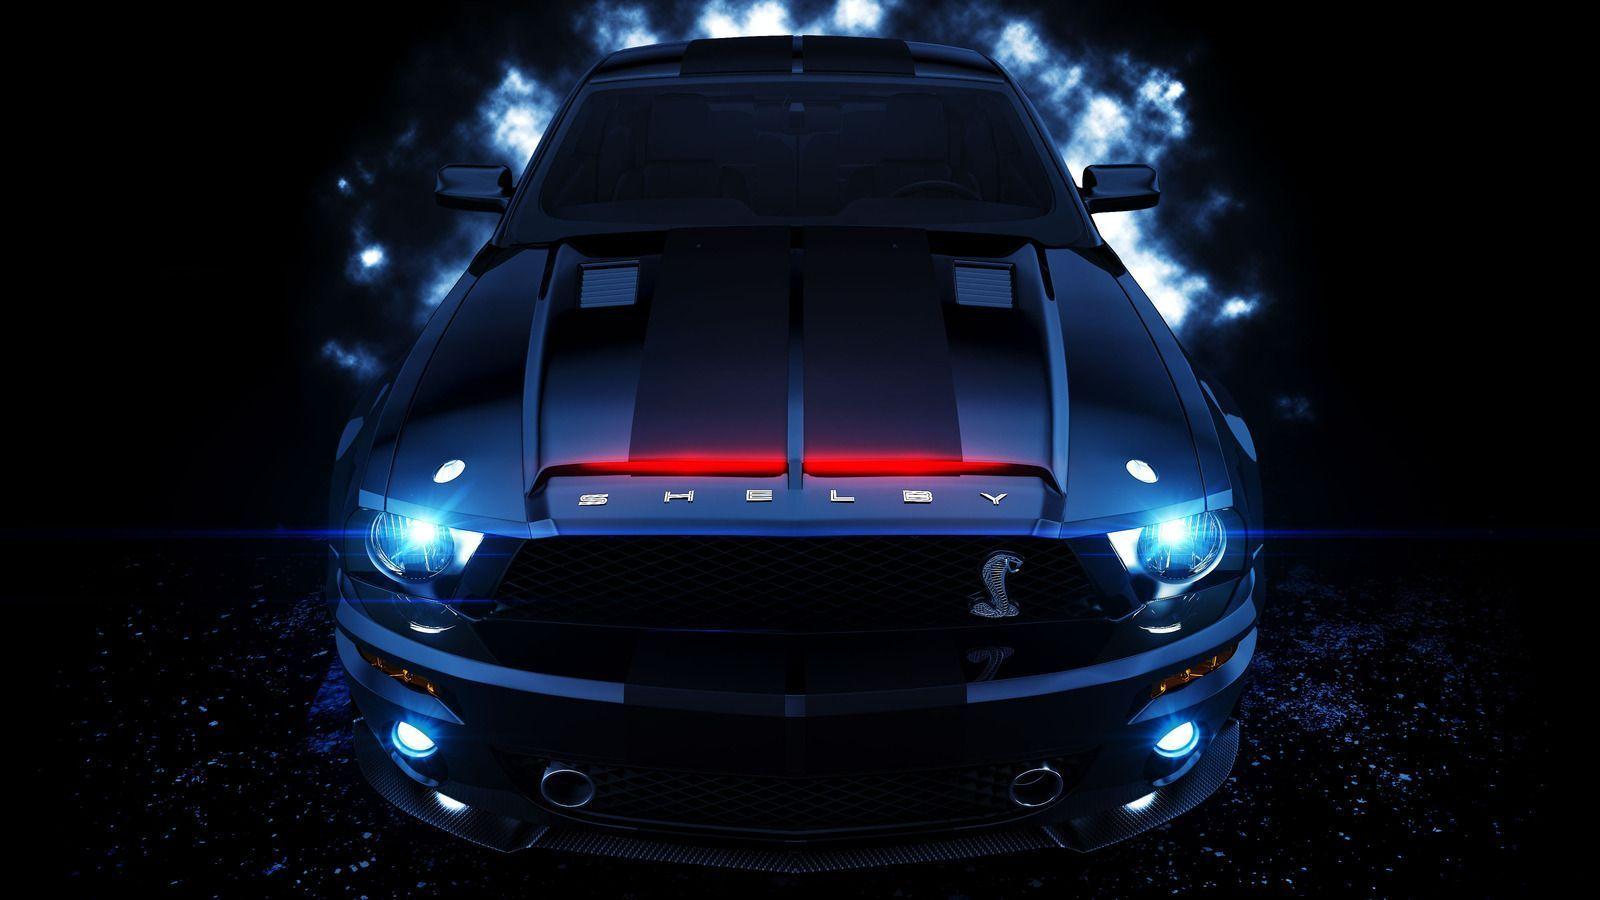 Ford Tungsten GT F Wallpaper Awesome Wallpaper. High